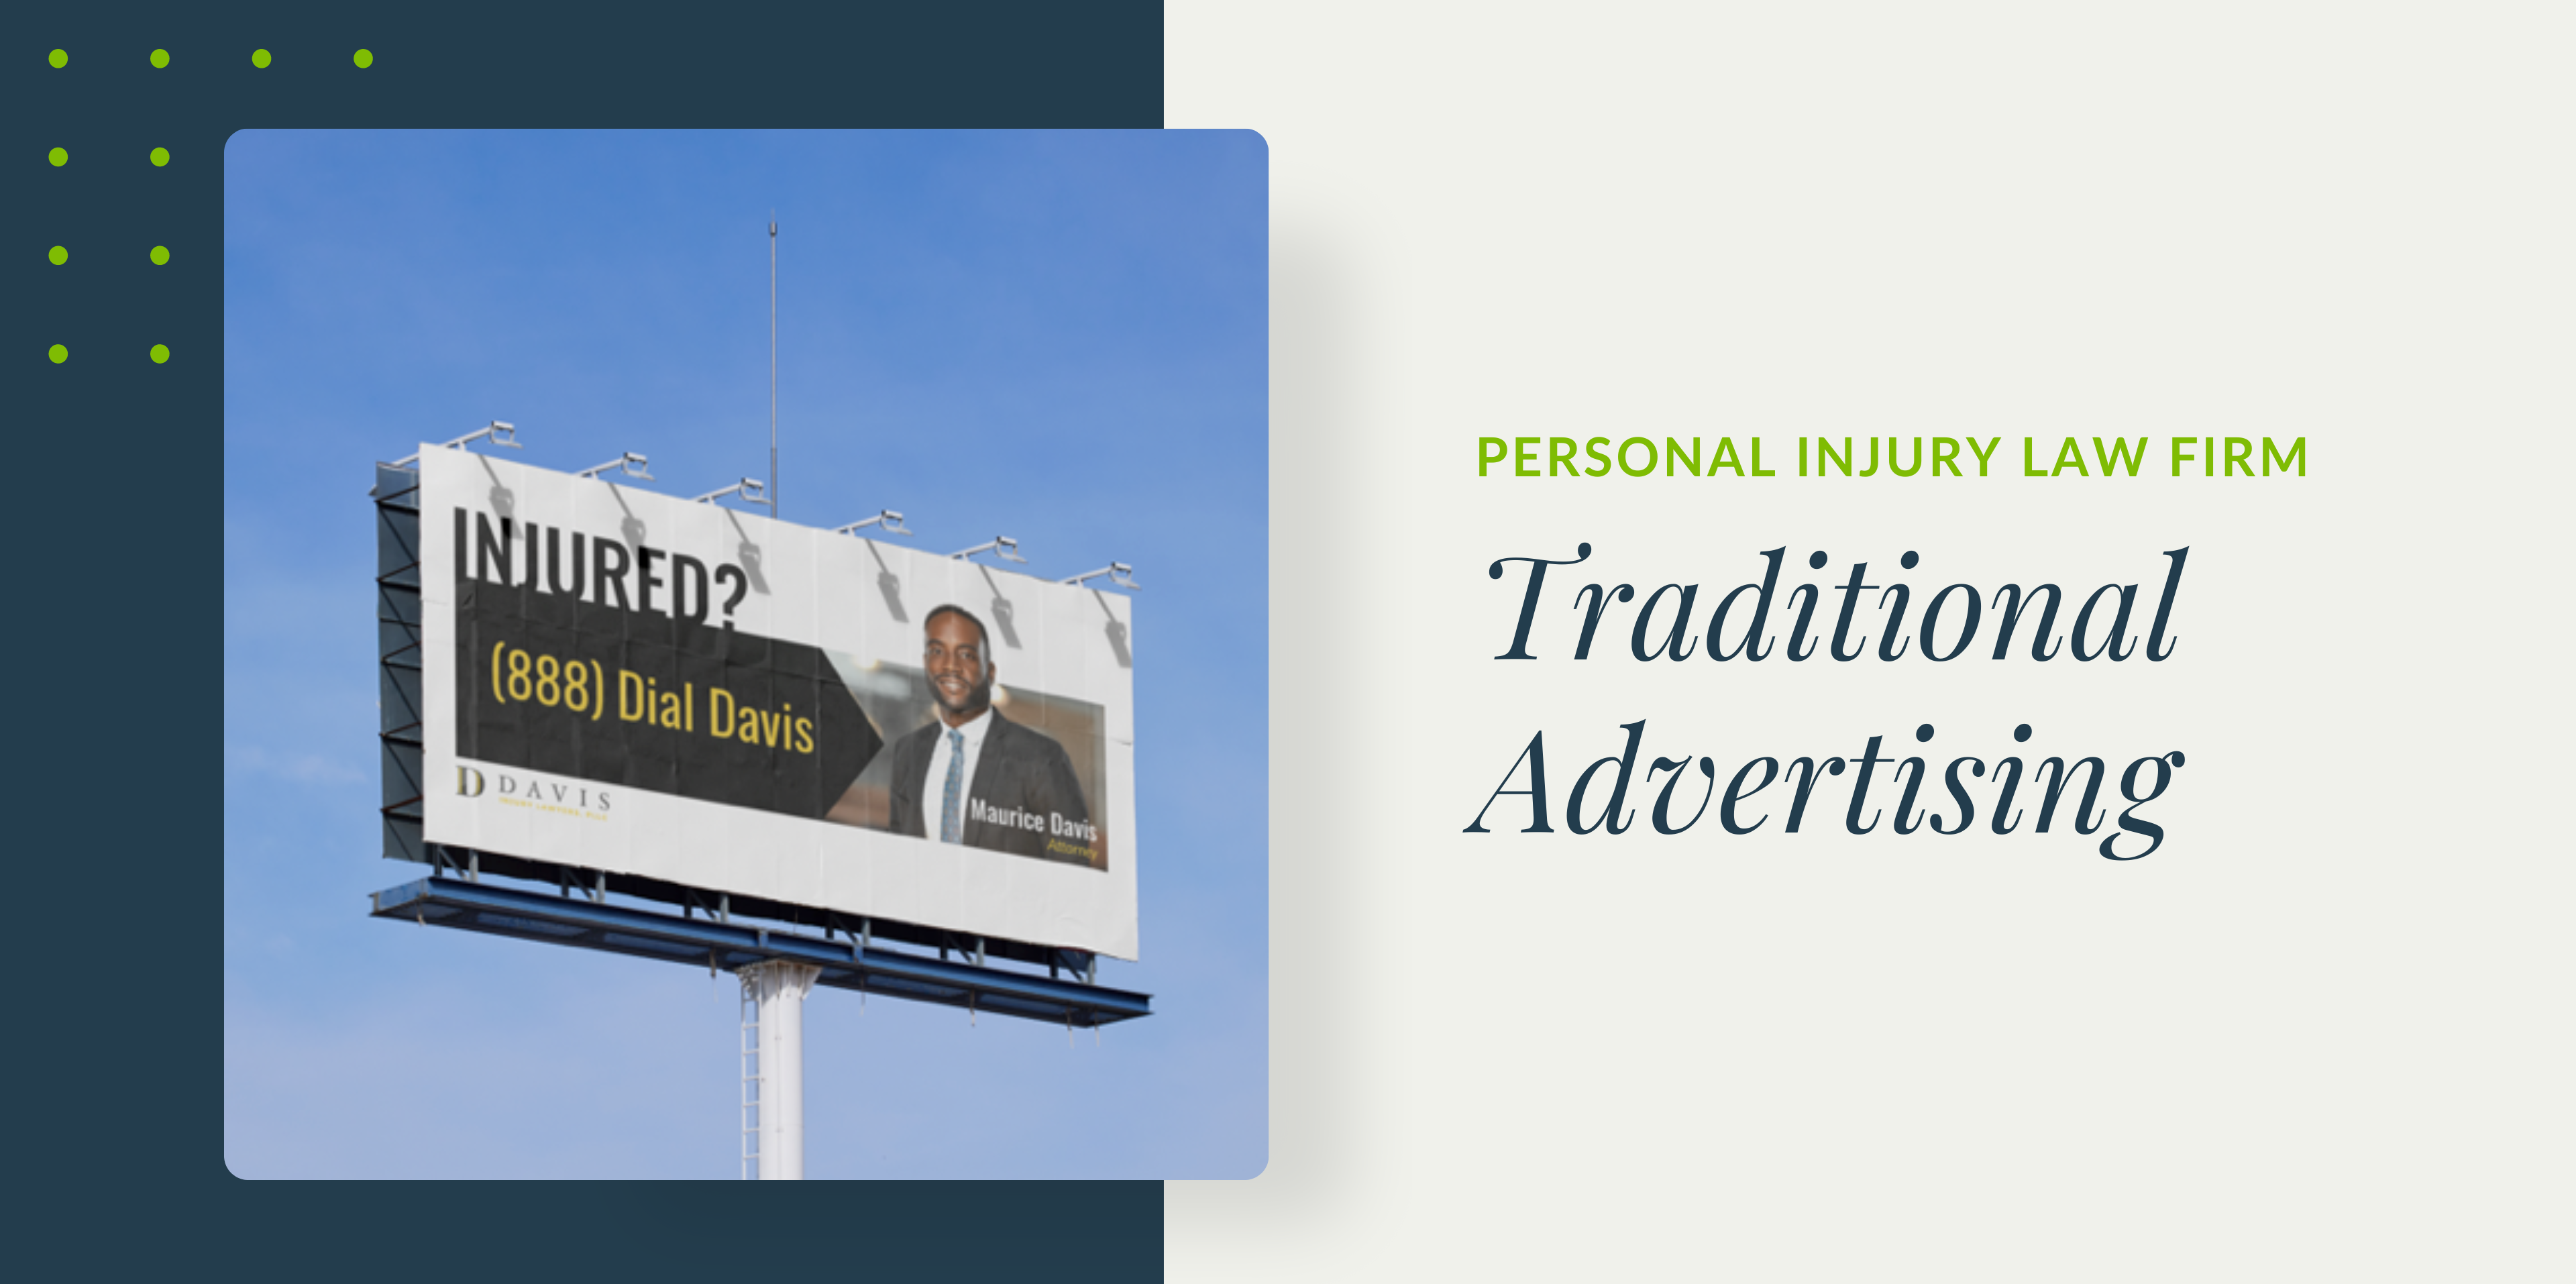 Graphic with the text "Traditional Advertising" with a screenshot of an attorney billboard.